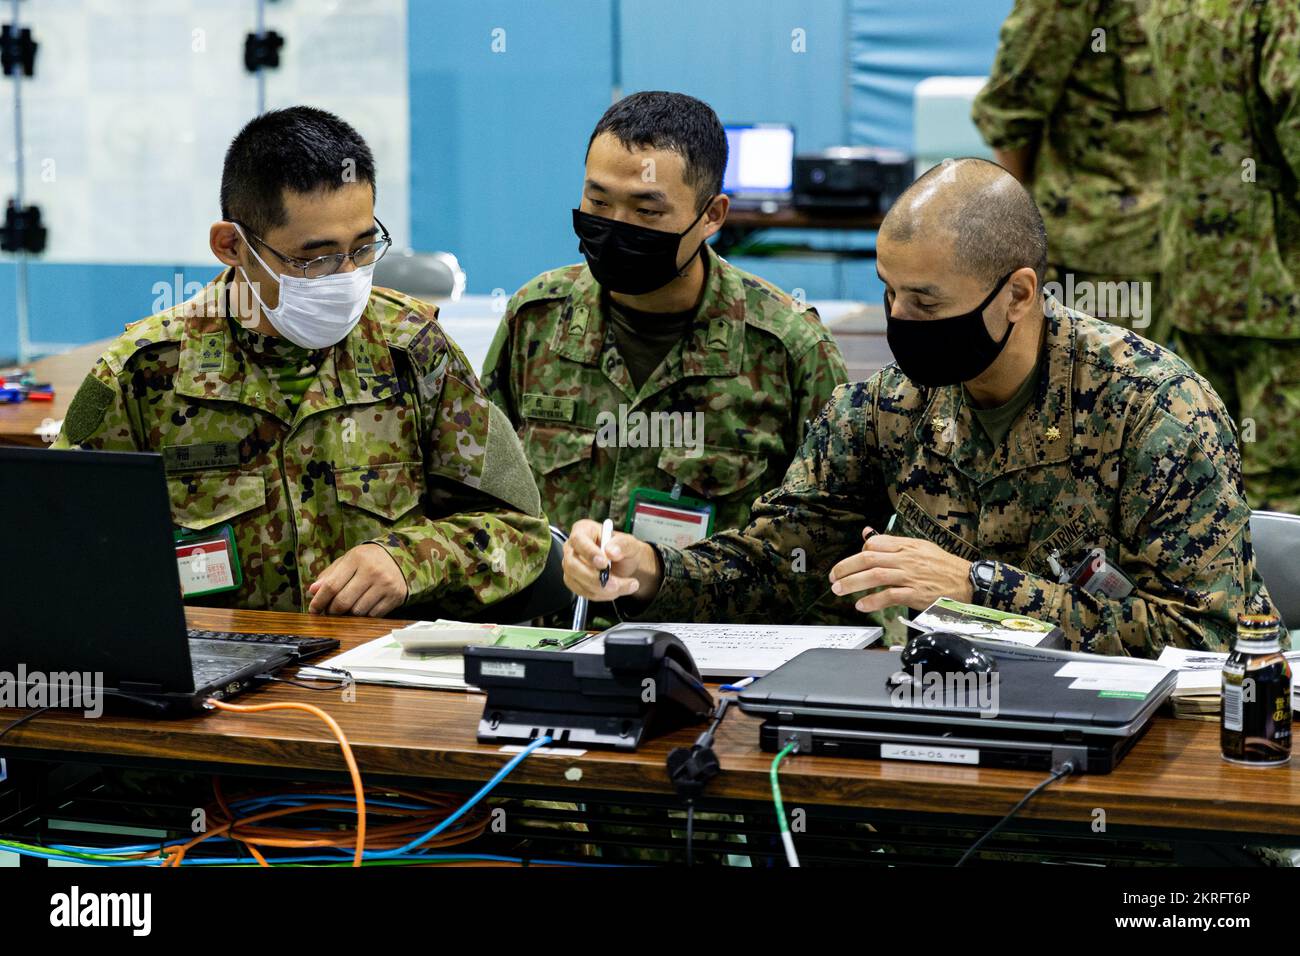 U.S. Marine Corps Maj. Frank Mastromauro, logistics officer for 12th Marine Regiment, and Japan Ground Self-Defense Force members with 14th Brigade synchronize operations in a Bilateral Ground Tactical Coordination Center during Keen Sword 23 in Yonaguni, Japan, Nov. 16, 2022. Keen Sword is a biennial training event that exercises the combined capabilities and lethality developed between 3d Marine Division, III Marine Expeditionary Force and the JGSDF. This bilateral field-training exercise between the U.S. military and Japan Self-Defense Force strengthens interoperability and combat readiness Stock Photo